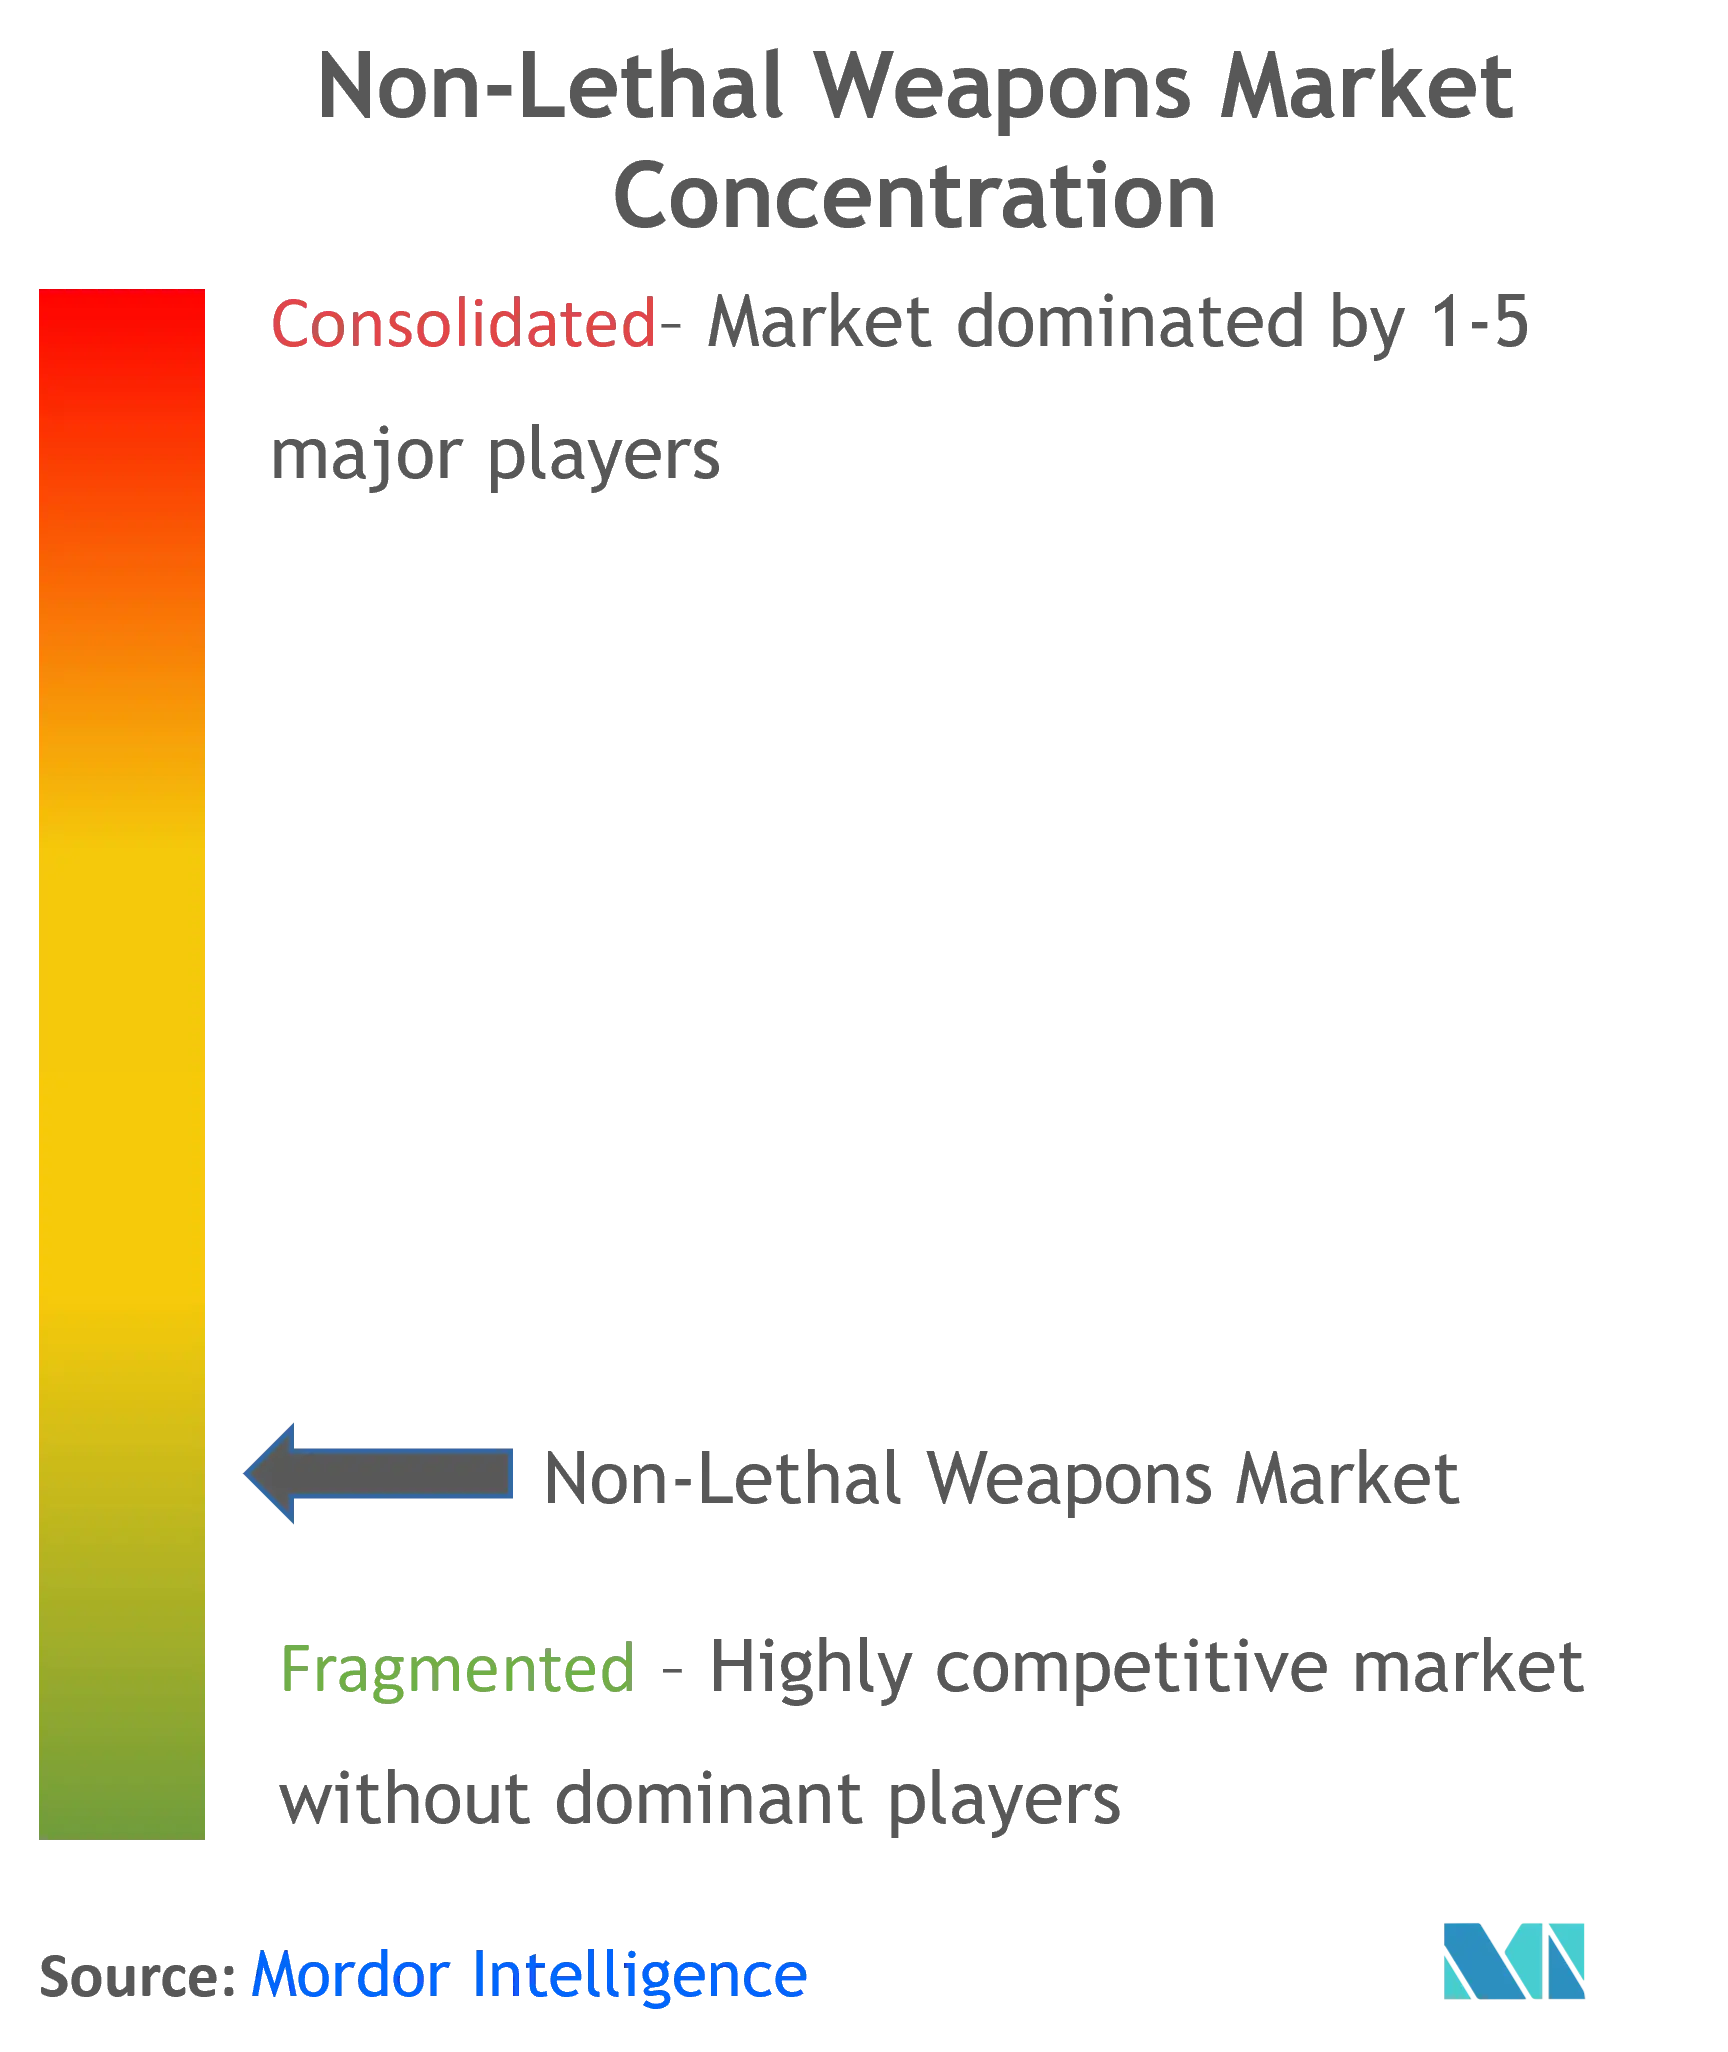 Non-lethal Weapons Market Concentration